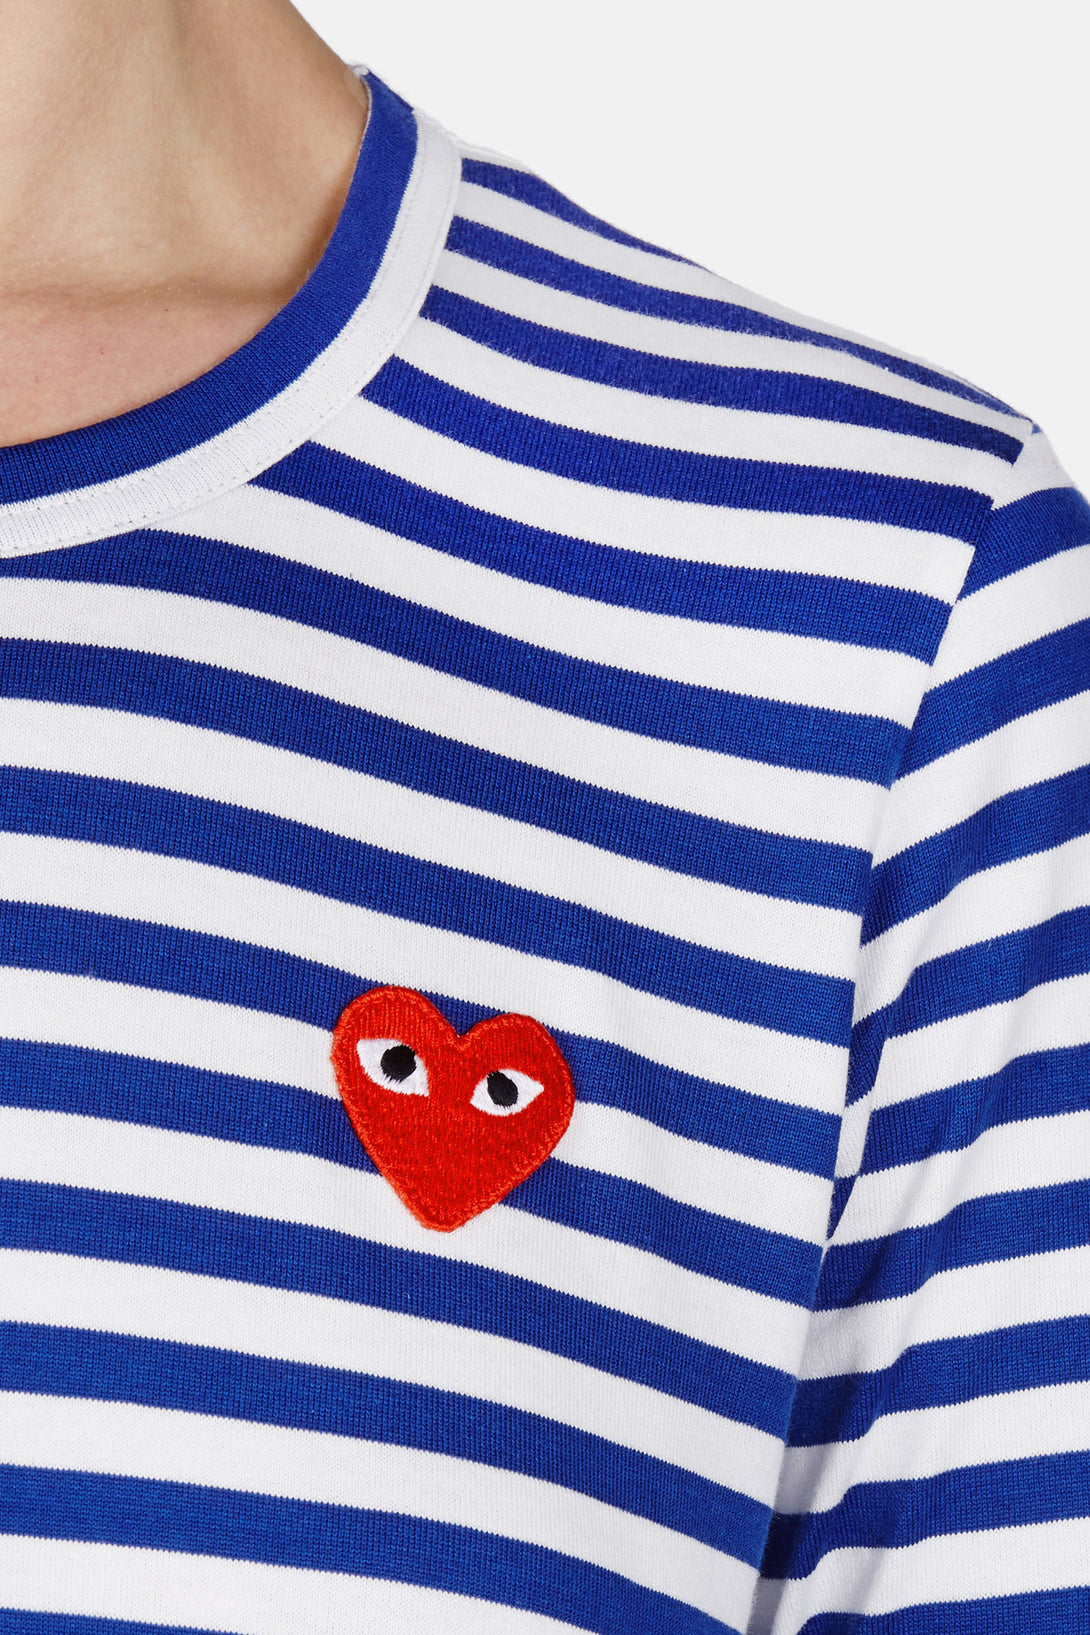 red and blue striped t shirt